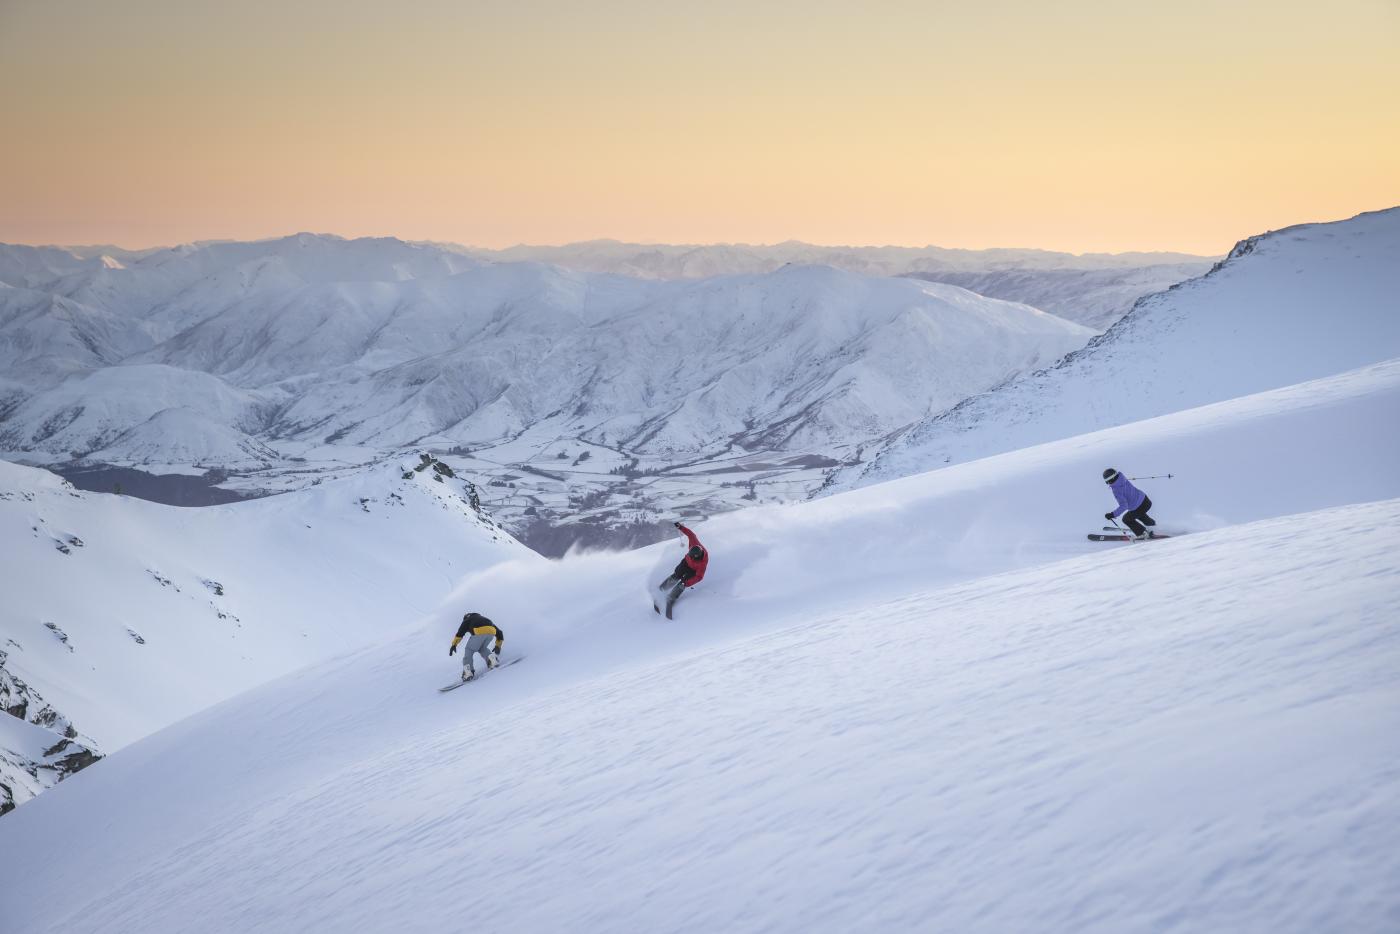 Group Skiing at The Remarkables Ski Field at sunrise